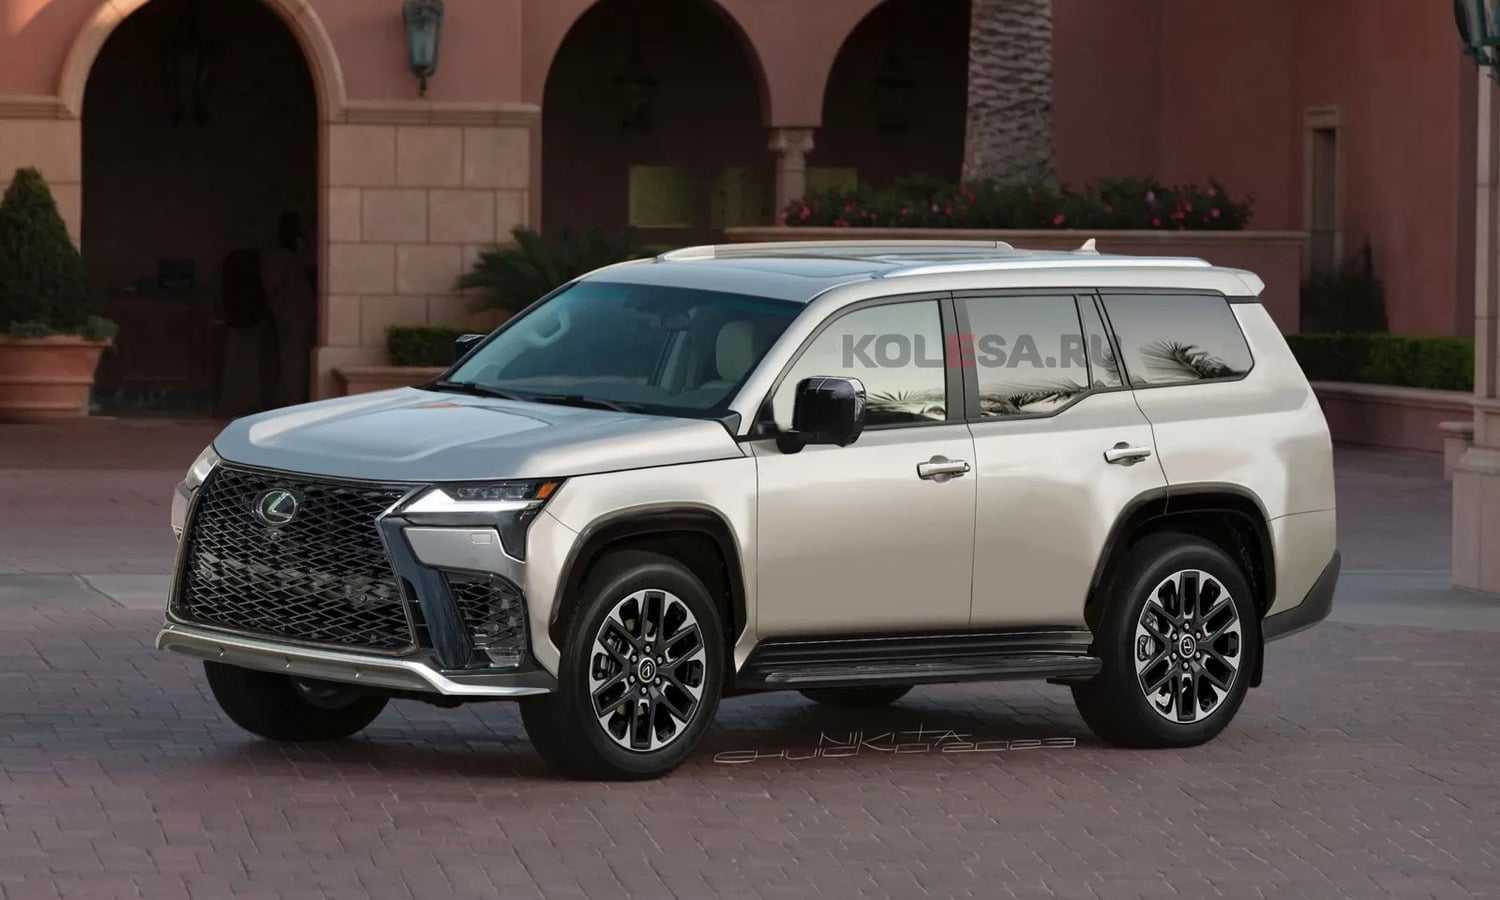 All-new lexus gx unveiled; a genuine off-roader that conquers any road